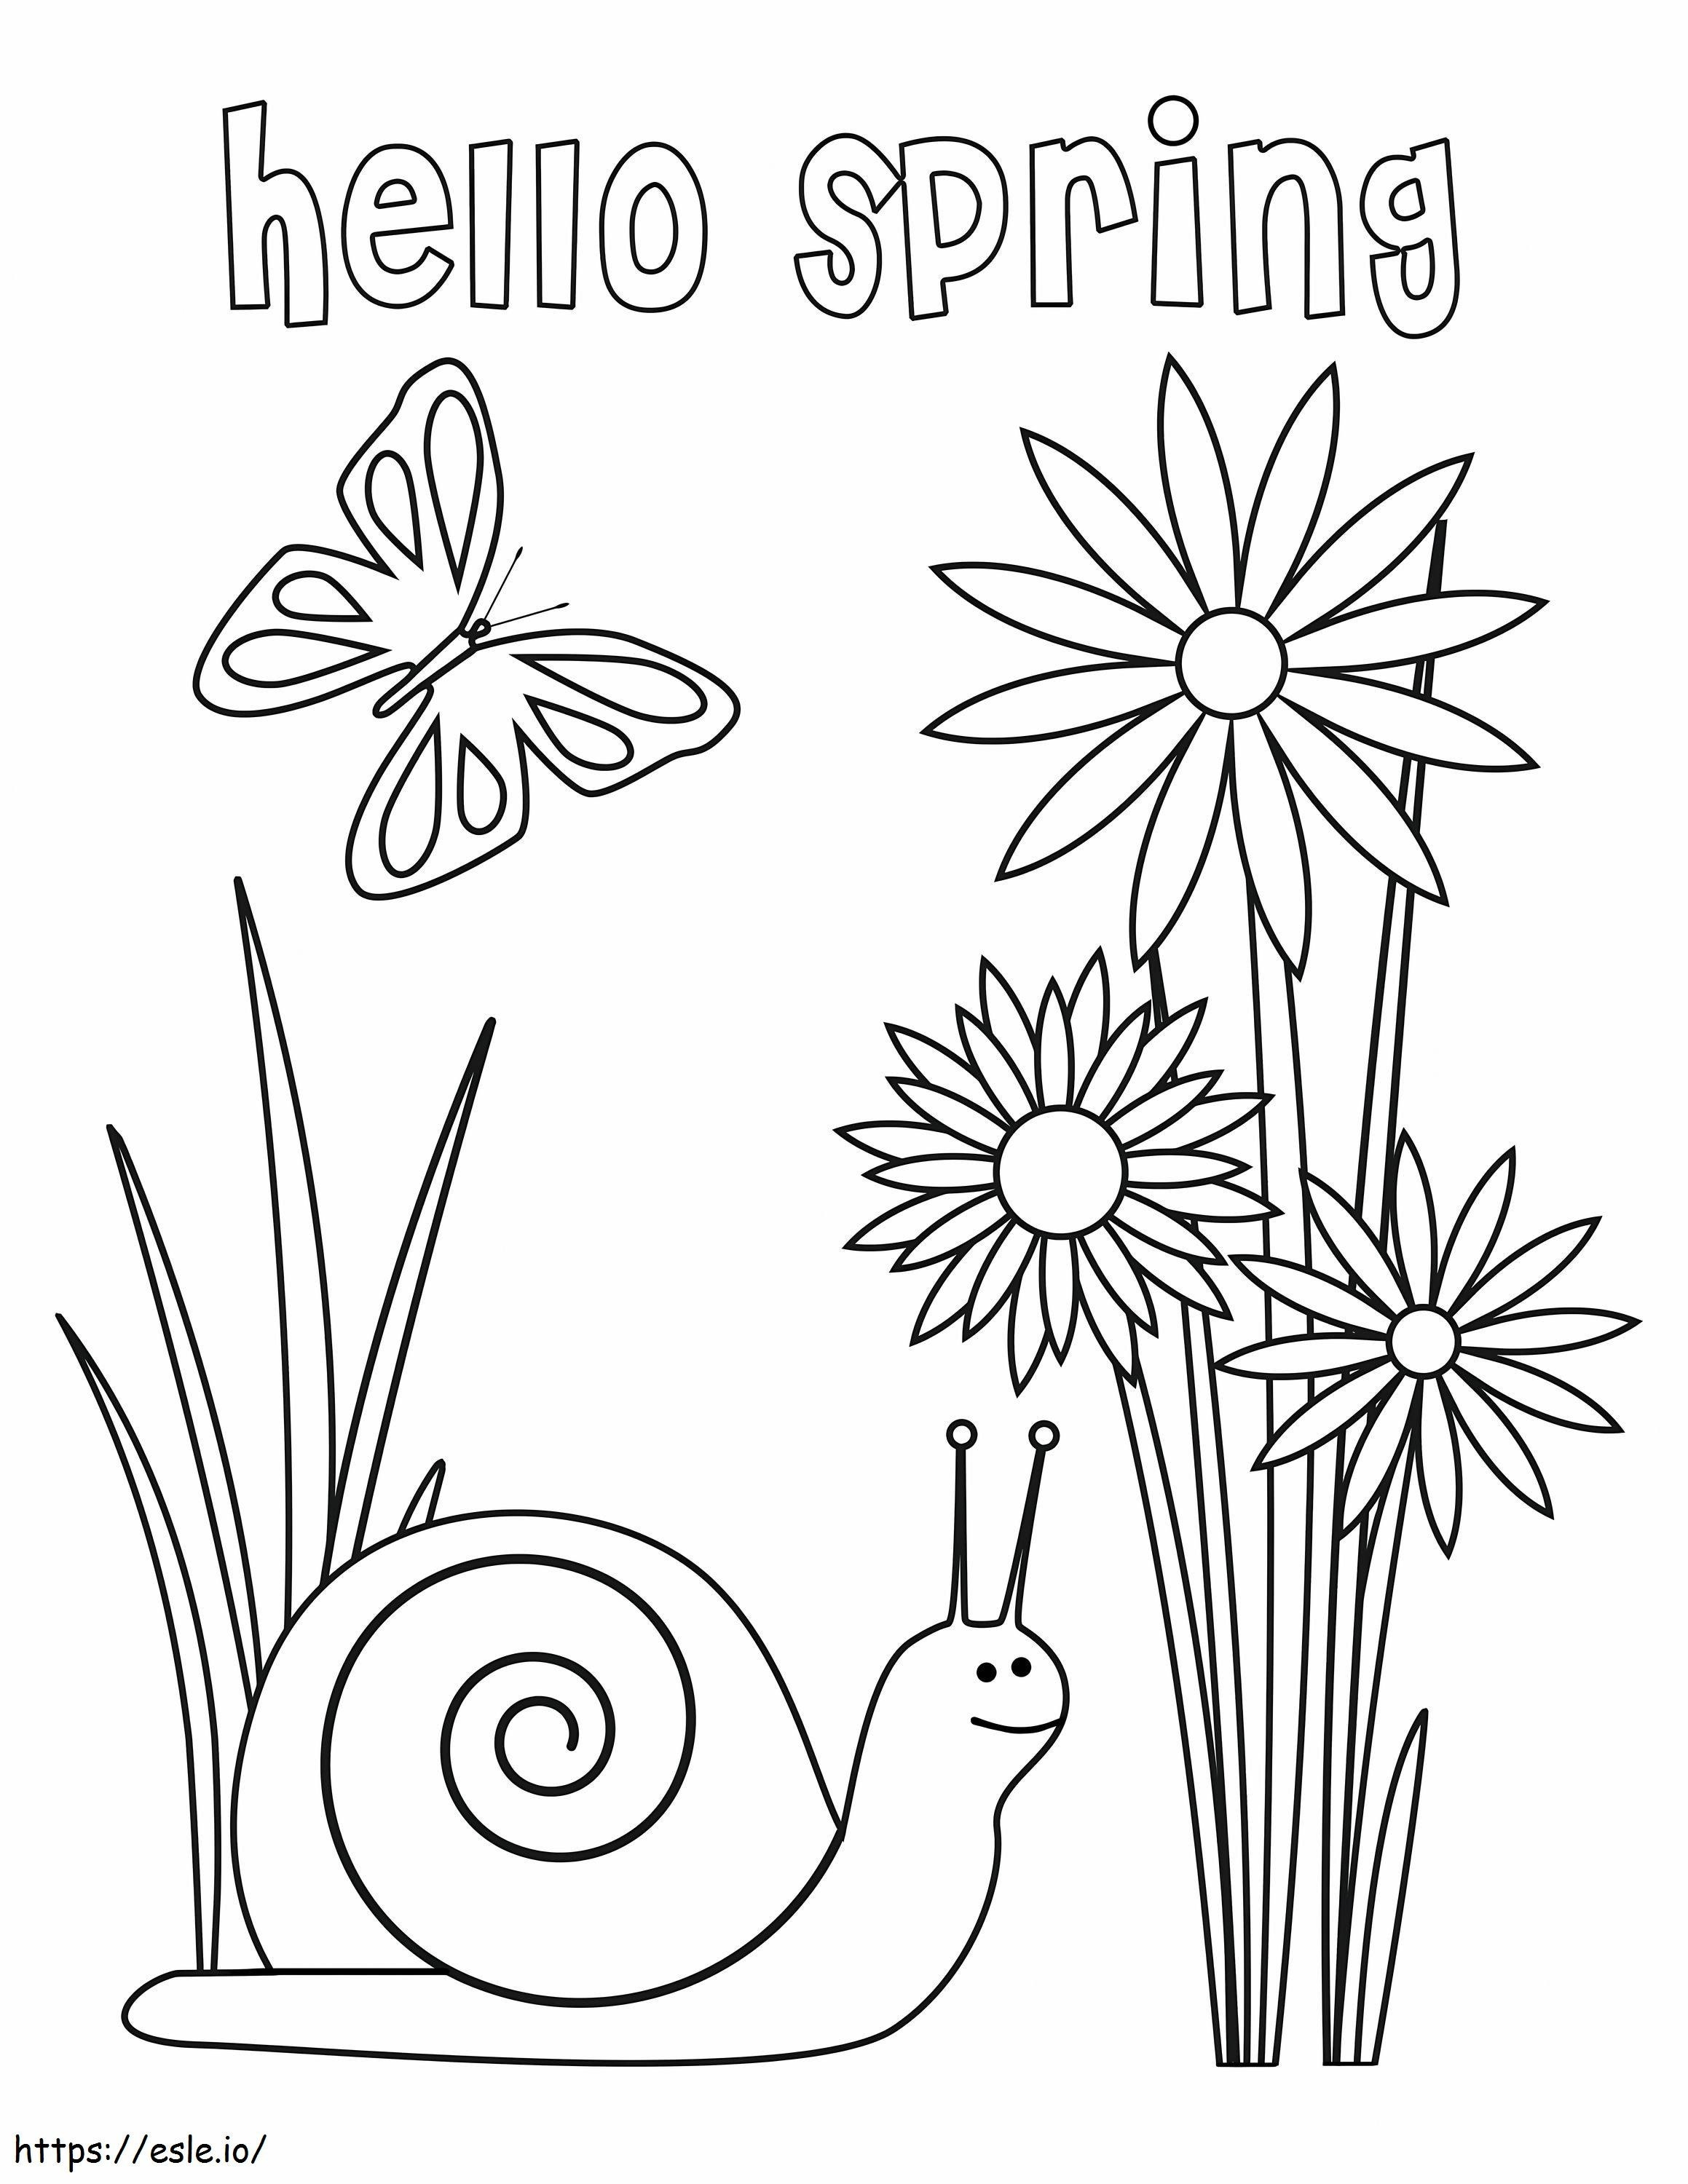 Awesome Hello Spring coloring page